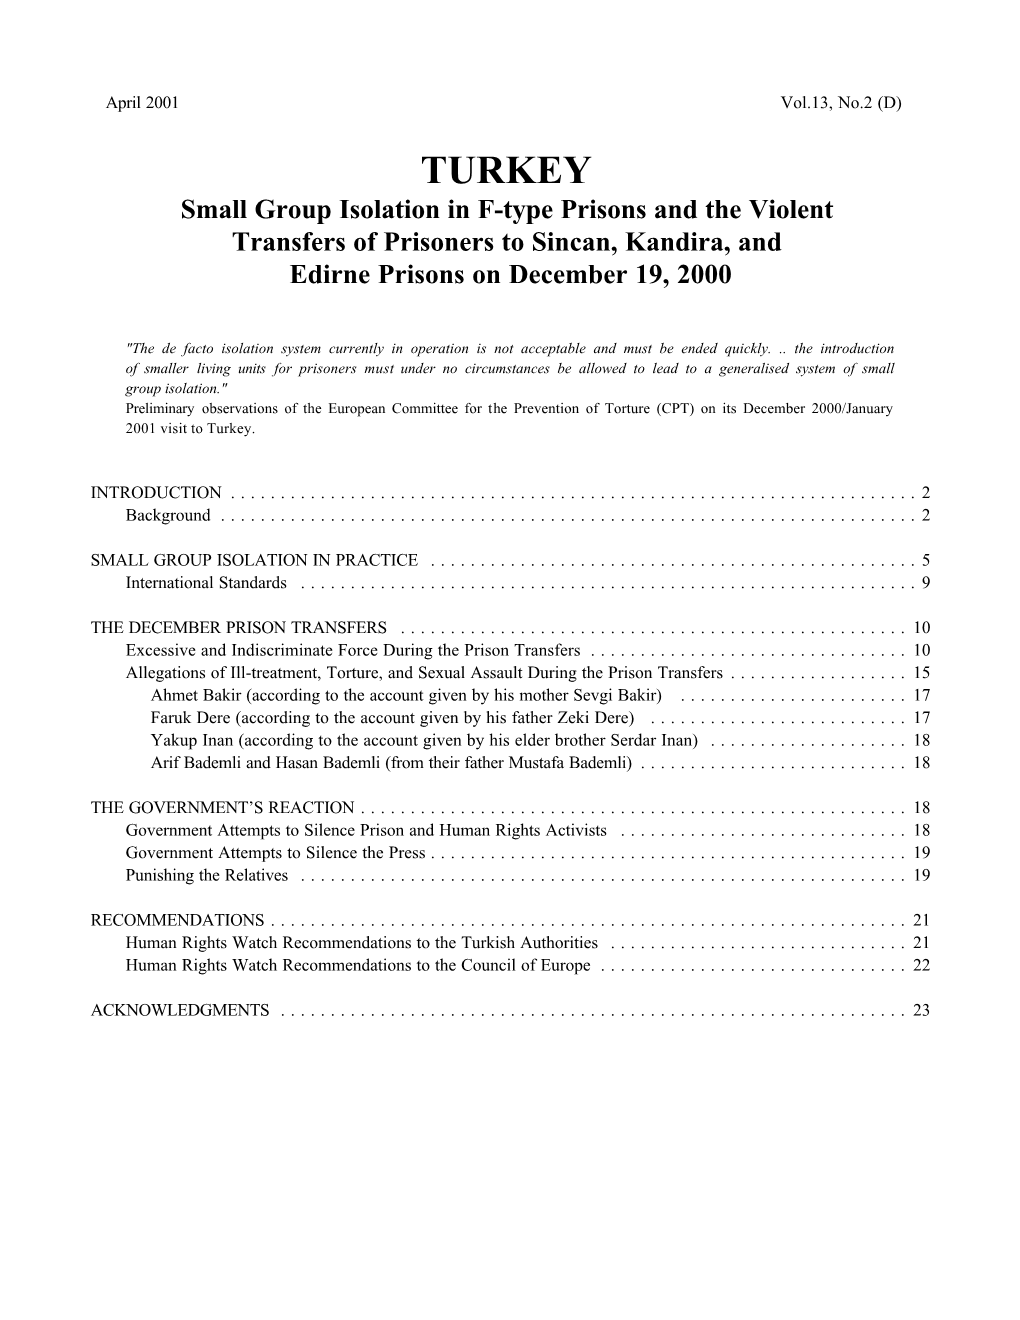 TURKEY Small Group Isolation in F-Type Prisons and the Violent Transfers of Prisoners to Sincan, Kandira, and Edirne Prisons on December 19, 2000